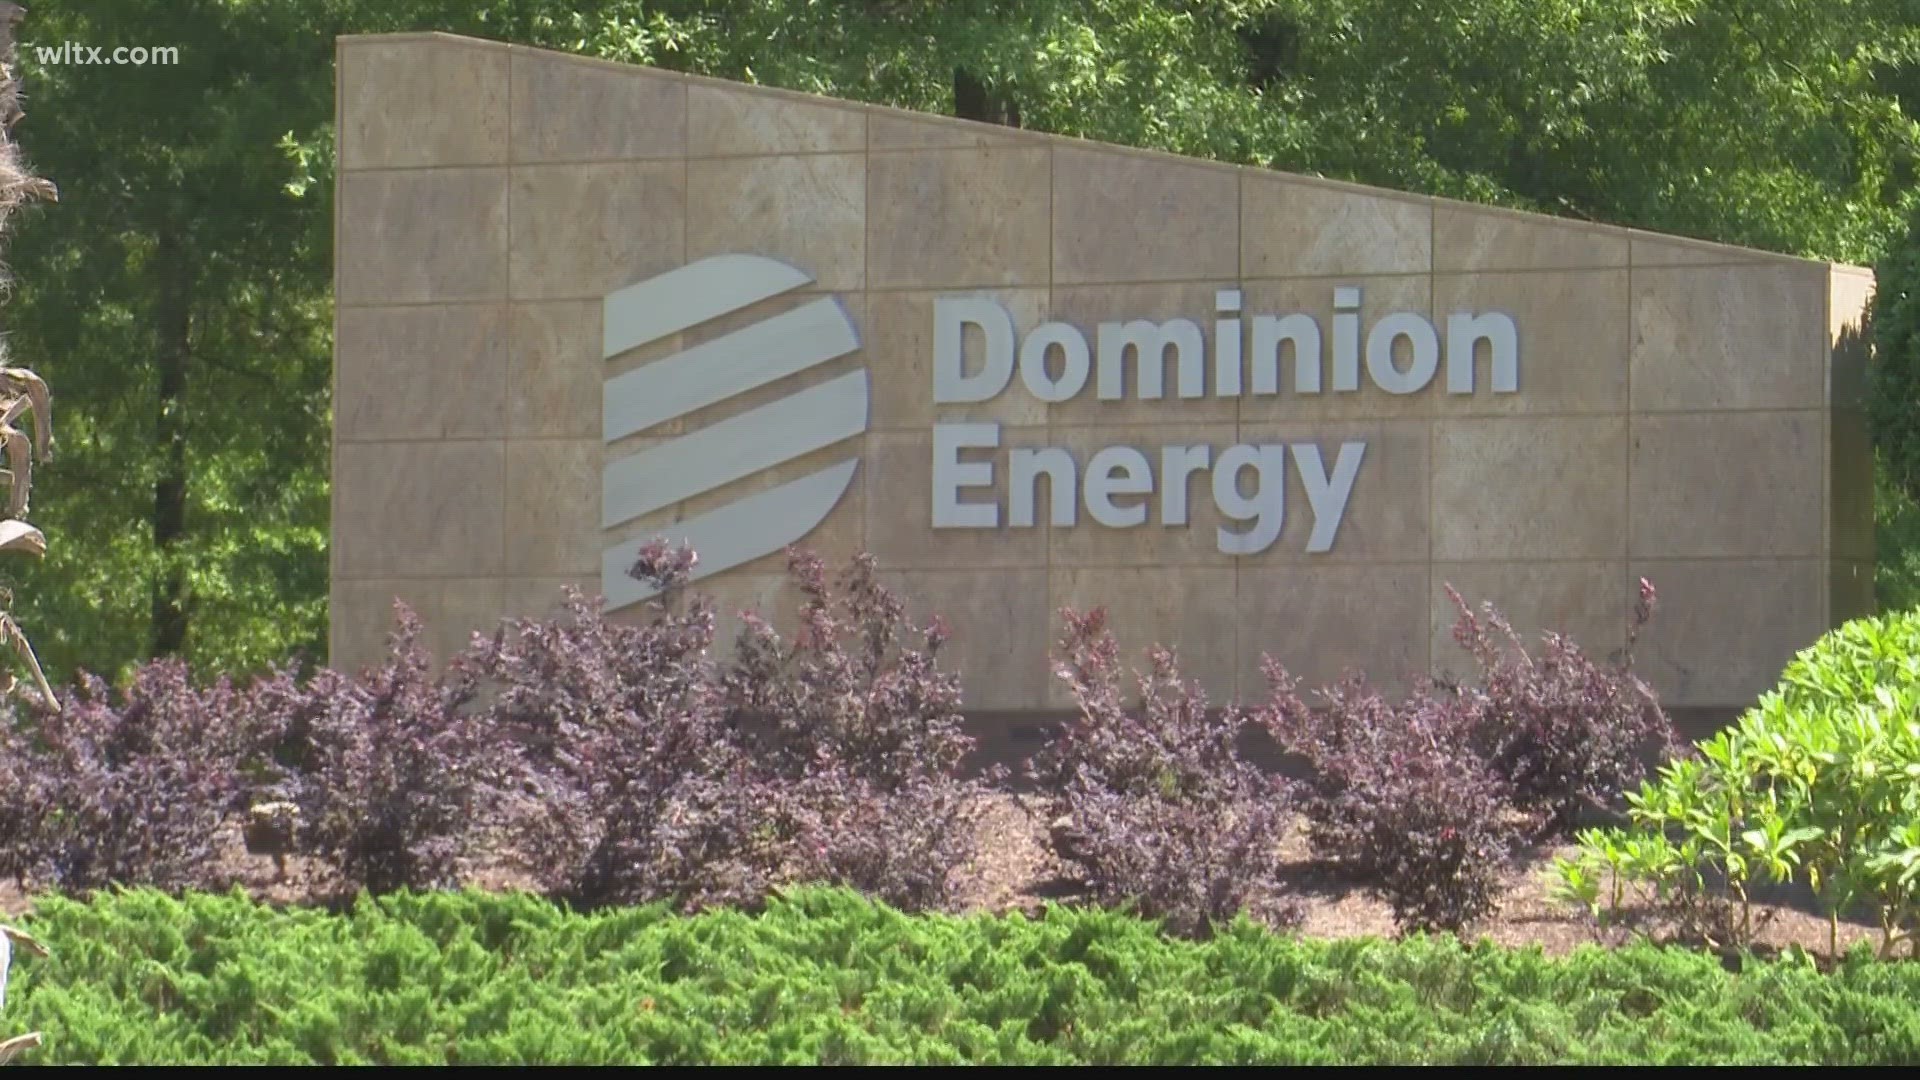 The potential sale of Dominion Energy's main campus could mean big change for the Cayce community.